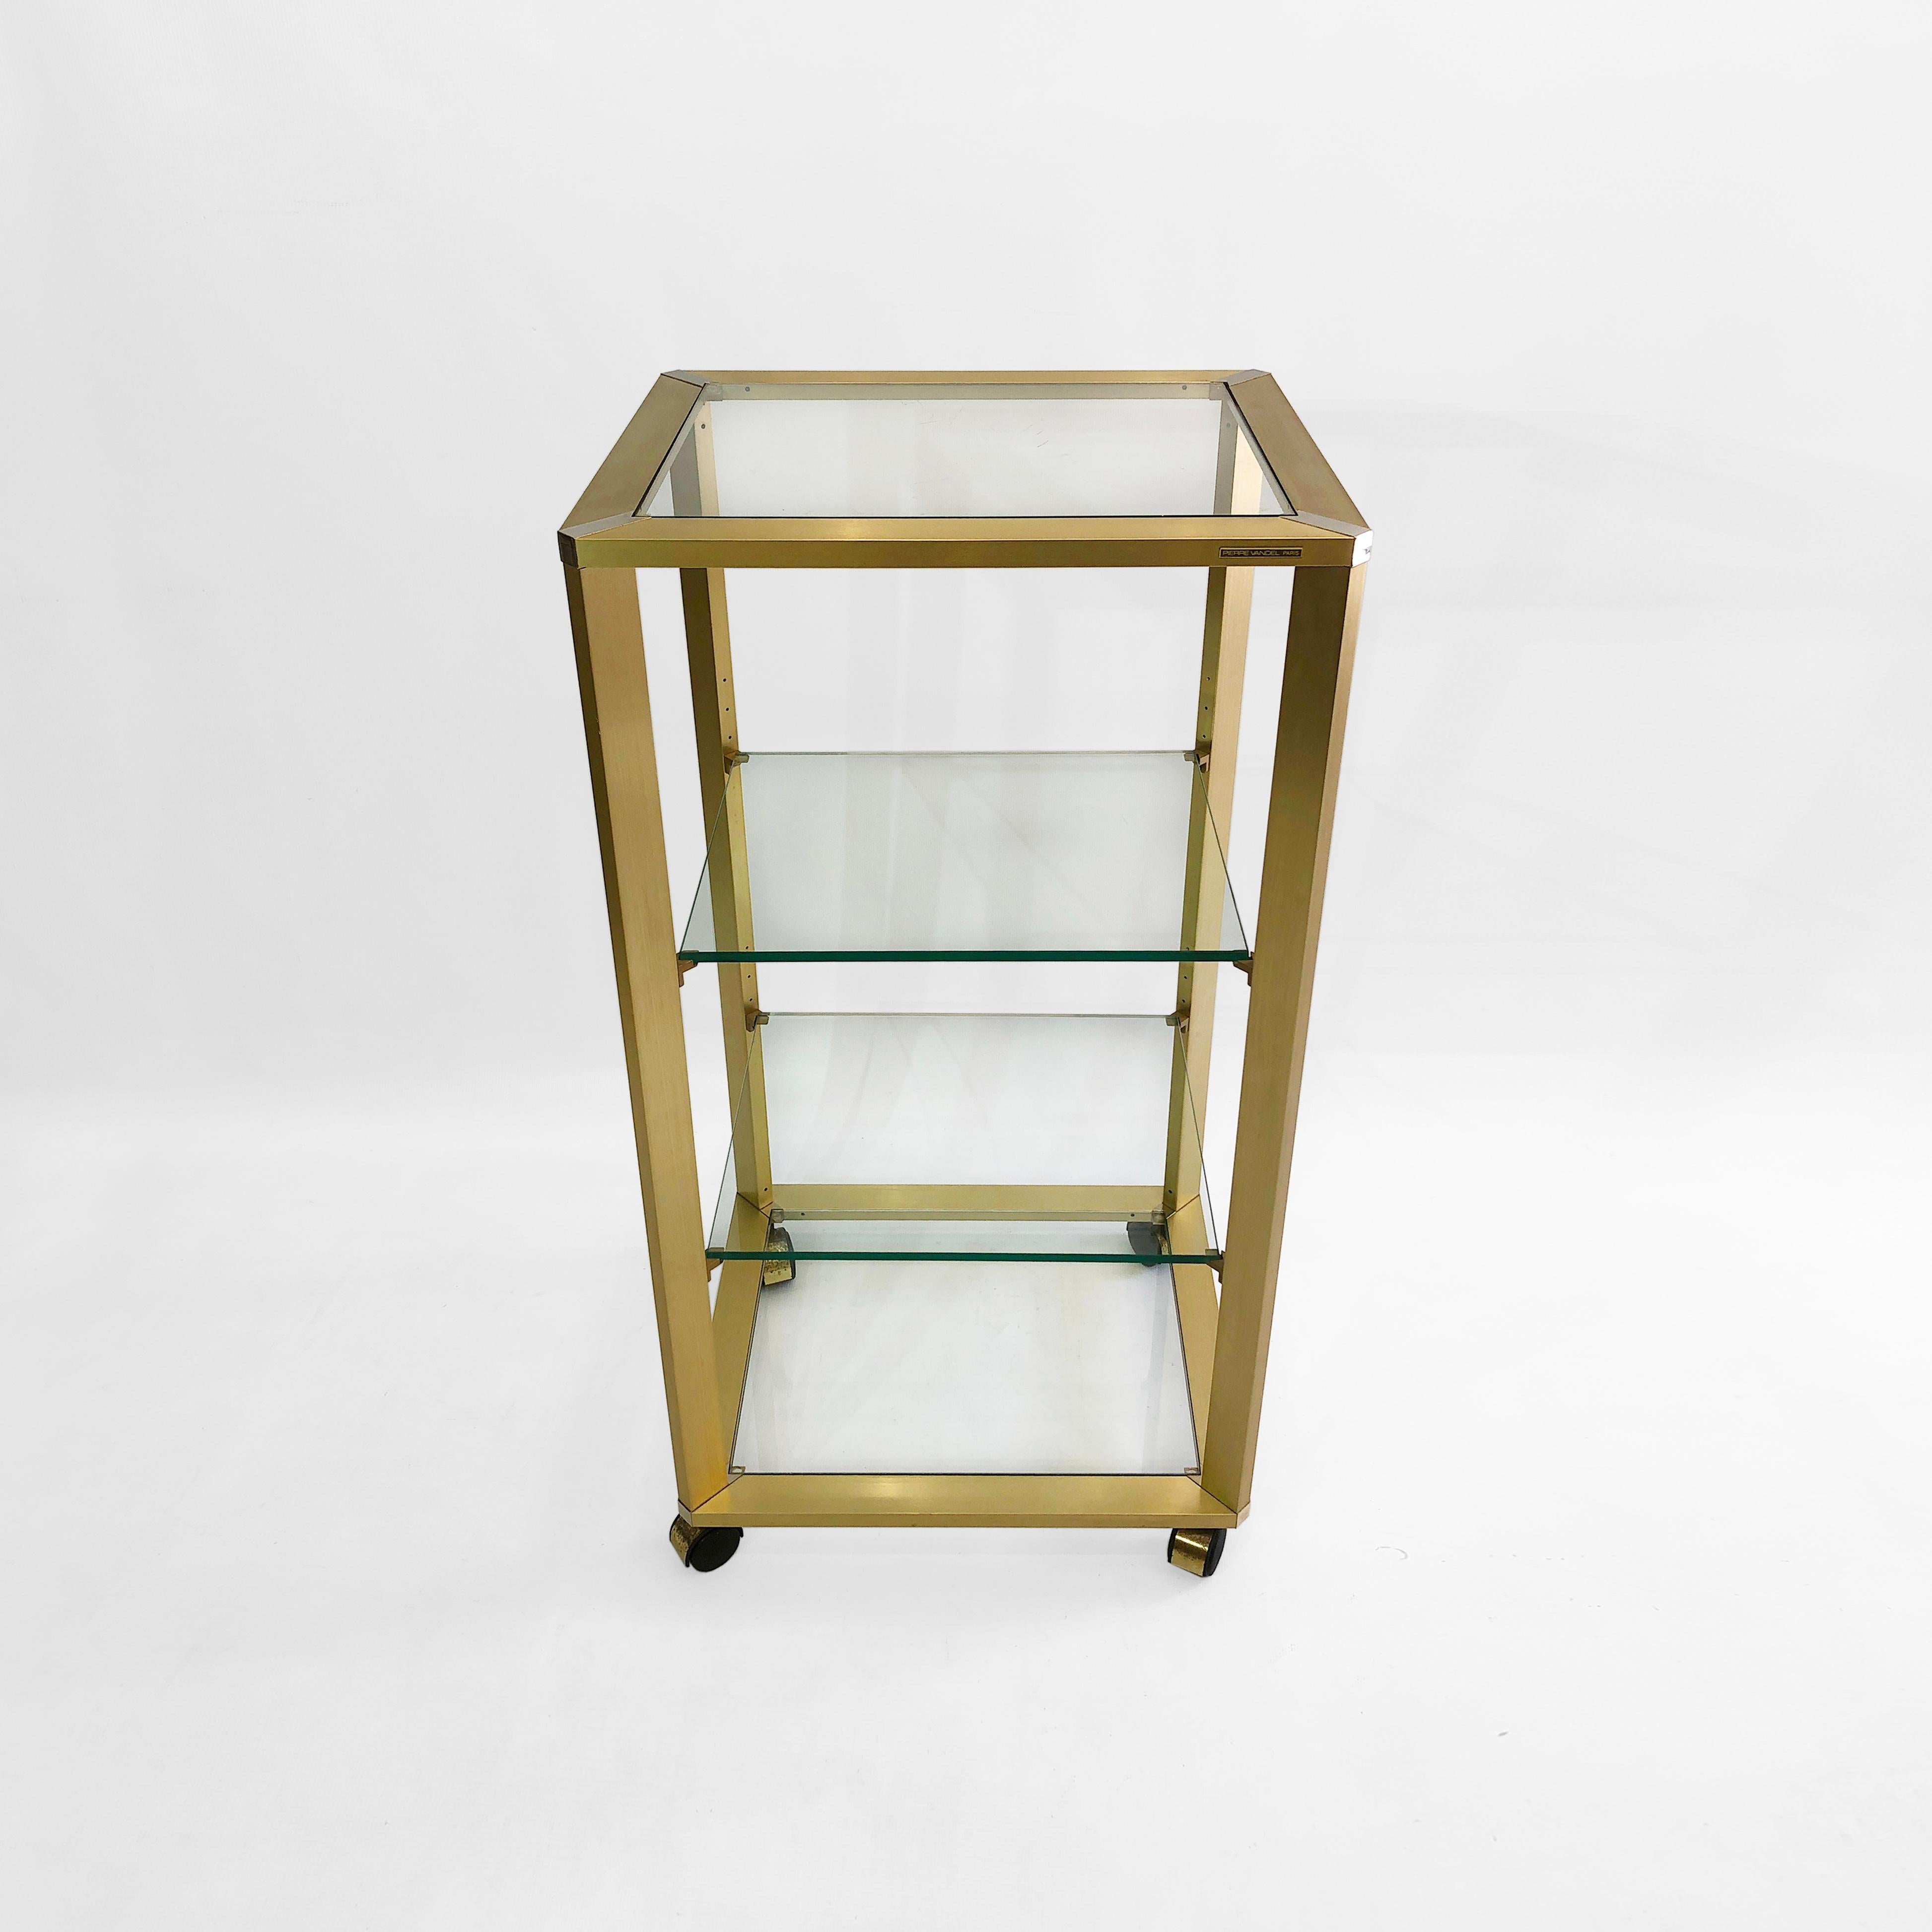 Plated Pierre Vandel Gold Brass Glass Etagere on Wheels 1970s Drinks Trolley Shelving For Sale